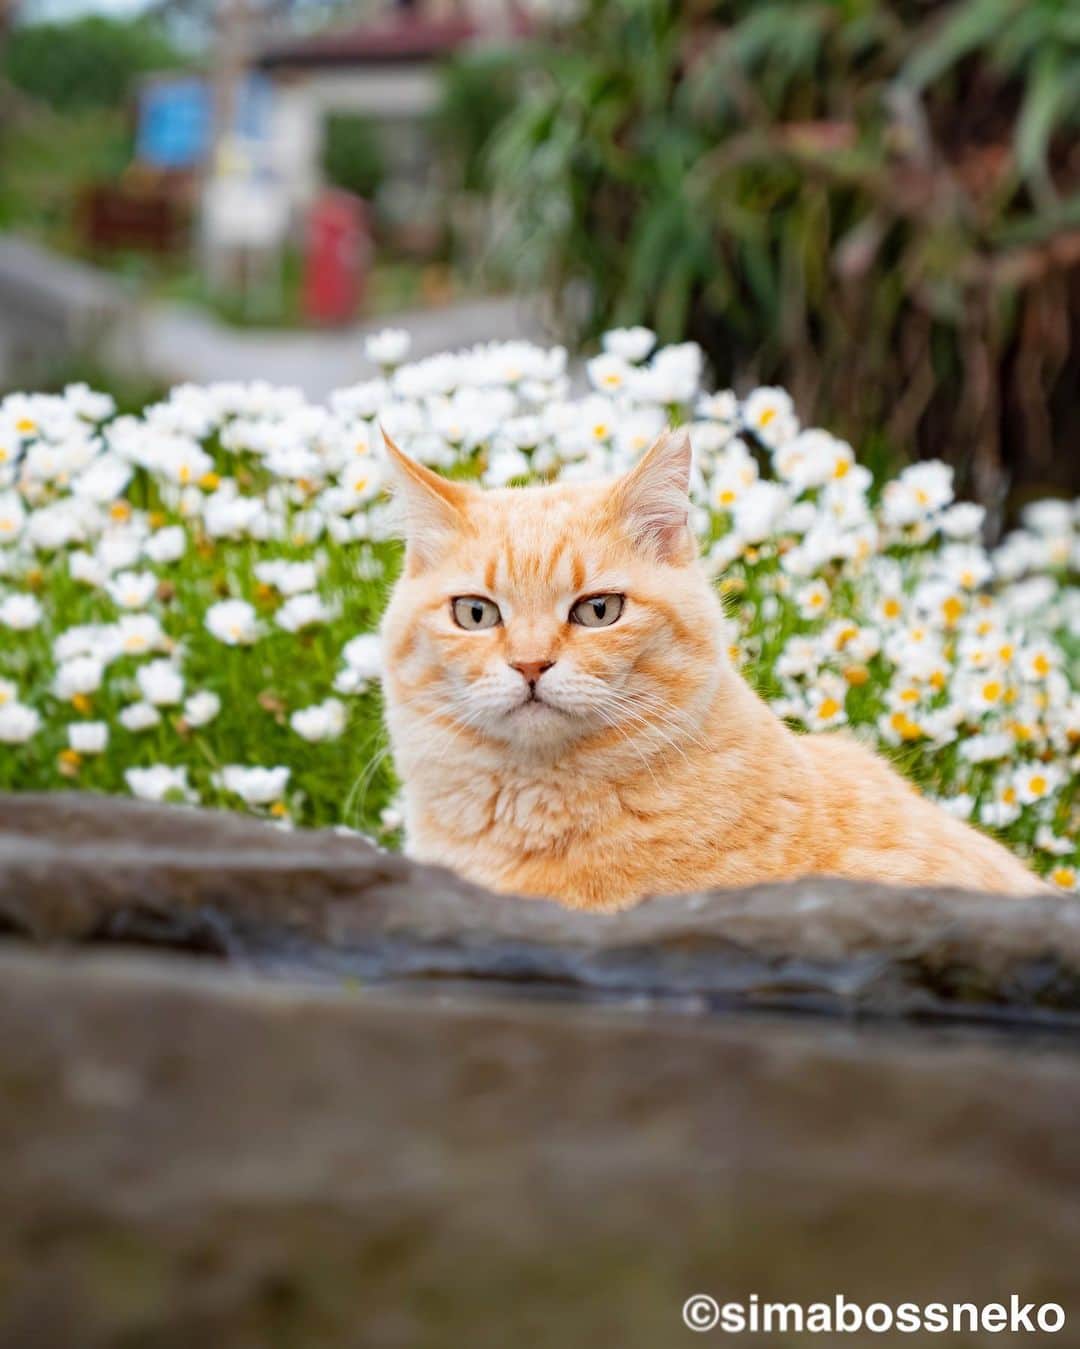 simabossnekoさんのインスタグラム写真 - (simabossnekoInstagram)「・ ひょっこりにゃ😸🌸 Flowers look good on cats.  5枚目の投稿は動画です。 The 5th post is video. Swipeしてね←←🐾  ・ 〜お知らせ〜 新作写真集「島にゃんこ」好評発売中❣️ @simabossneko と、ぺにゃんこ( @p_nyanco22 )との初共著🐾  日本の島々で7年間撮り続けてきた、島の猫さん達のとびっきりの表情やしぐさがいっぱい✨ 厳選したベストショットから初公開の作品まで、愛おしくて幸せな瞬間を集めました。  ★Amazonほかオンライン書店、本屋さんにて  お気に入りの一冊になれば嬉しく思います☺️  📘A5変形サイズ／88ページ 1,210円(税込) ワニブックス刊  Amazonへは @simabossneko もしくは @p_nyanco22 のプロフィールURLよりご覧いただけます。 ・ ・ 【Notice】 NEW 3rd Photobook "Shima Nyanko (Island Cats)"  The book is co-authored by @simabossneko and @p_nyanco22  There are lots of wonderful photos of island cats✨   〜Description of the work〜 The cute cats that we have been shooting for 7 years in the islands of Japan.  From the carefully selected best shots to the first public photo, we have collected lovely and happy gestures. Kissing, cuddling, rubbing, synchronizing, playing, licking... The cats will heal you!  Please make a purchasing for this opportunity 😸🐾 The product page can be seen from the URL in the profile of @simabossneko or @p_nyanco22   ★Amazon Japan https://www.amazon.co.jp/dp/4847072863  It is possible to purchase and ship from Taiwan, Hong Kong, the USA, Korea, etc. ※ Shipping fee will be charged separately.  📘A5 variant size / 88 pages 1,210 JPY Published by Wanibooks ・ ・ #しまねこ #島猫 #ねこ #にゃんすたぐらむ #猫写真 #cats_of_world #catloversclub #pleasantcats #catstagram #meowed #ig_japan #lumixg9」6月30日 7時30分 - simabossneko